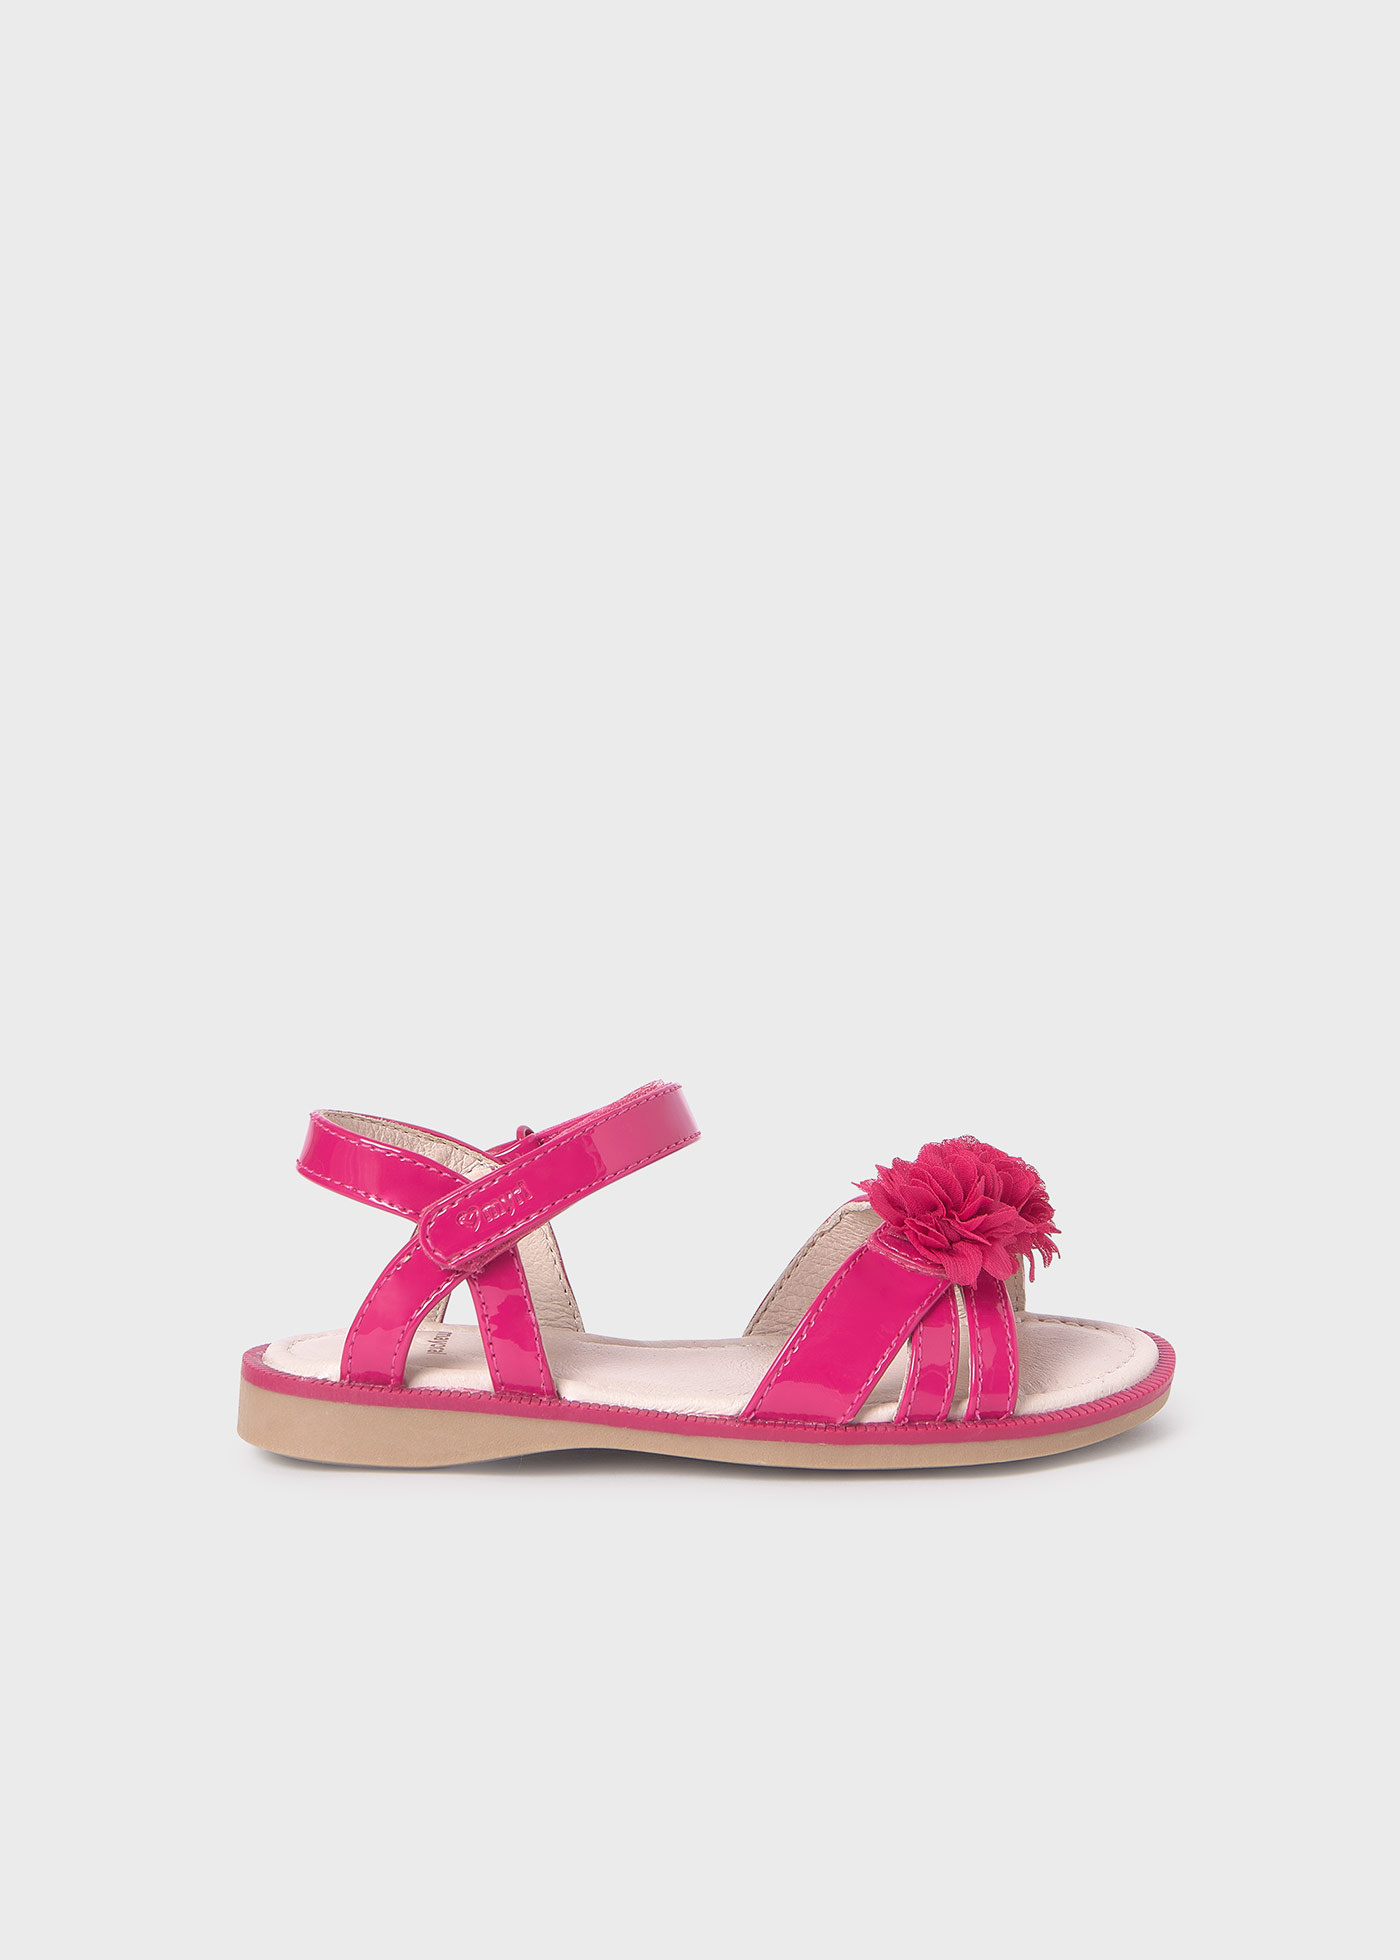 Girls sandals sustainable patent leather